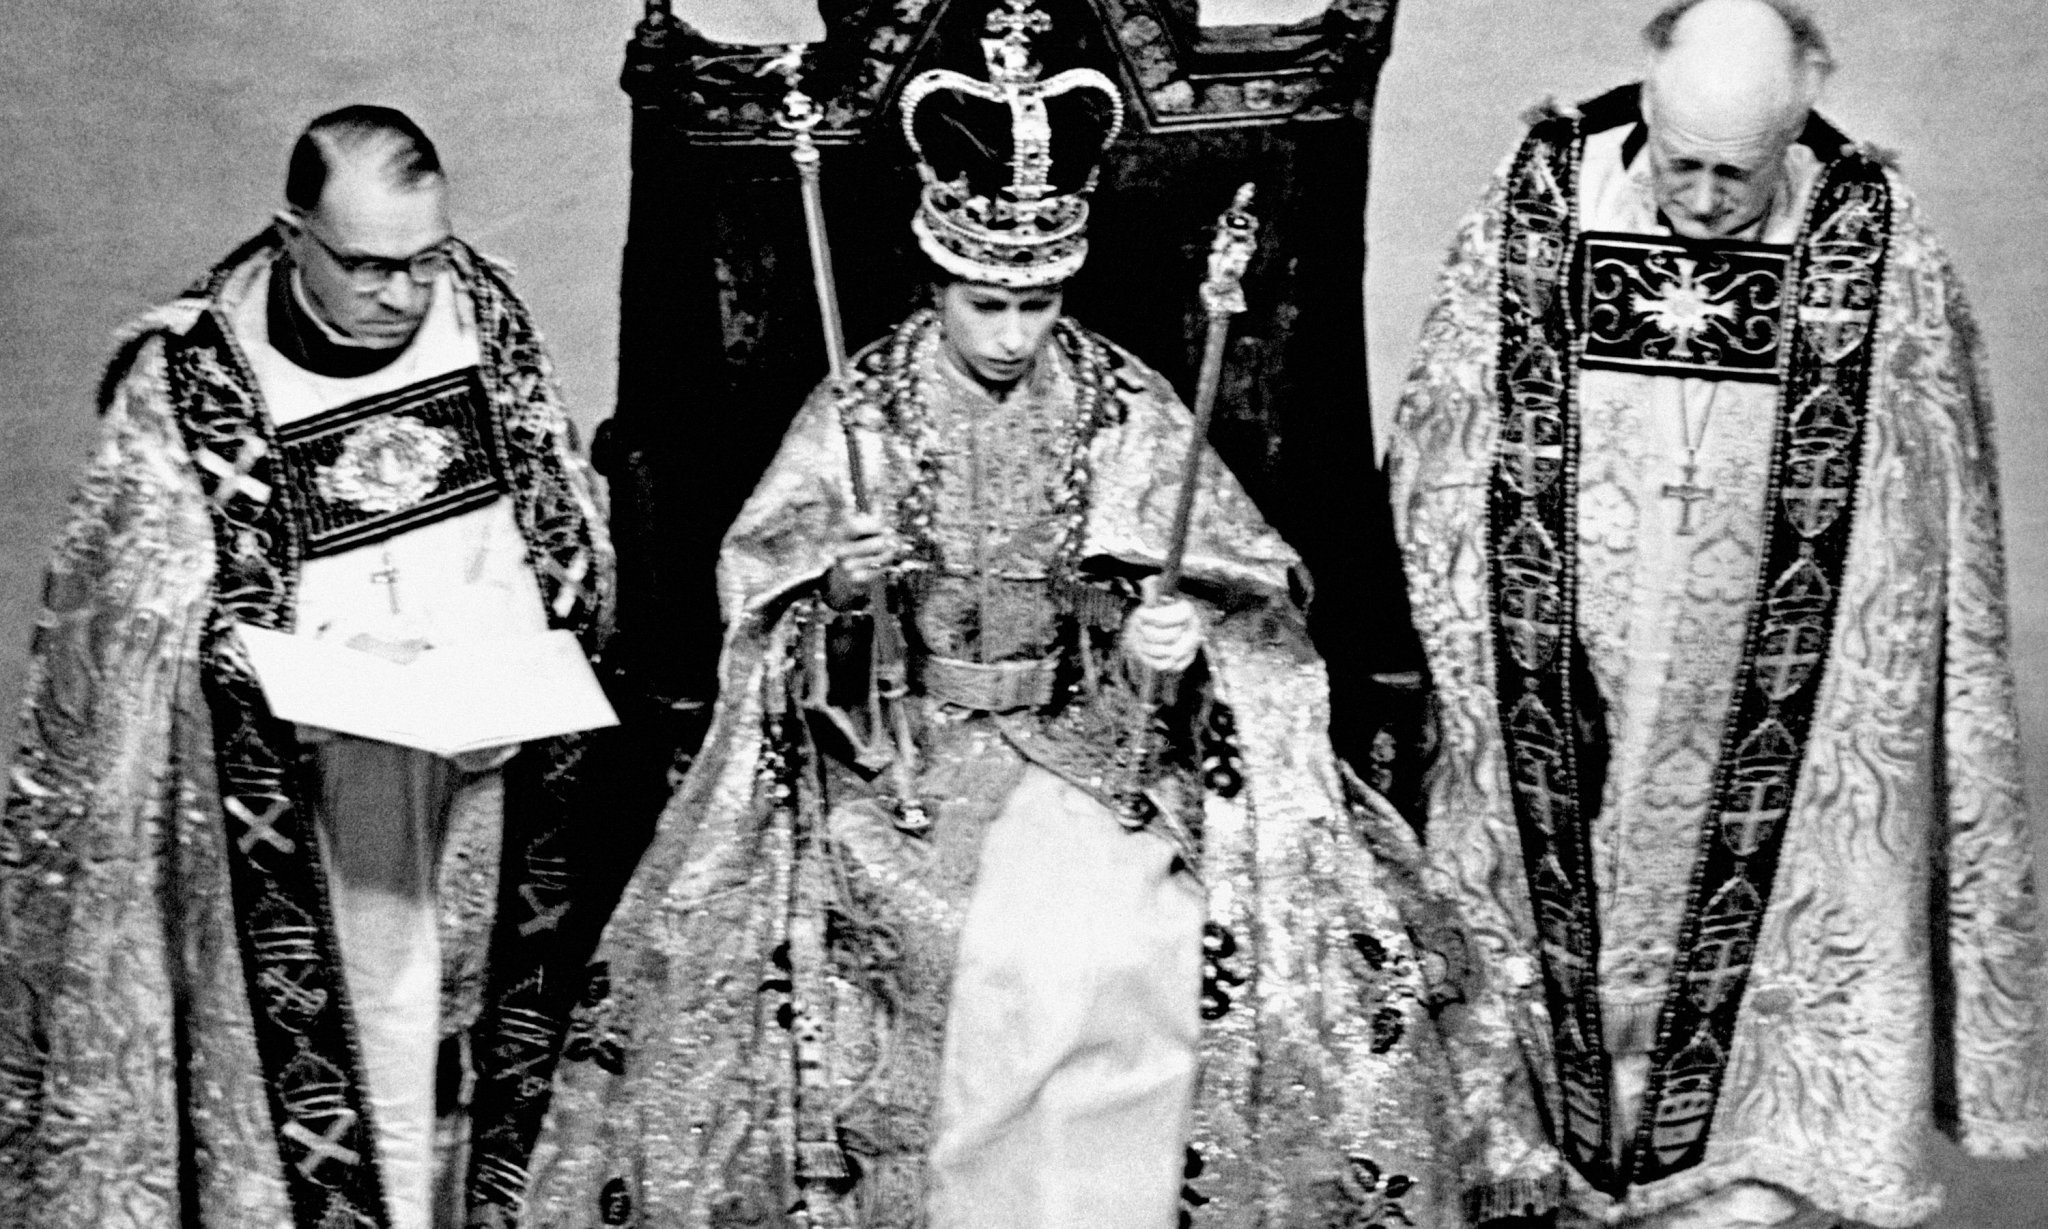 The Queen's Coronation: A Moment in History